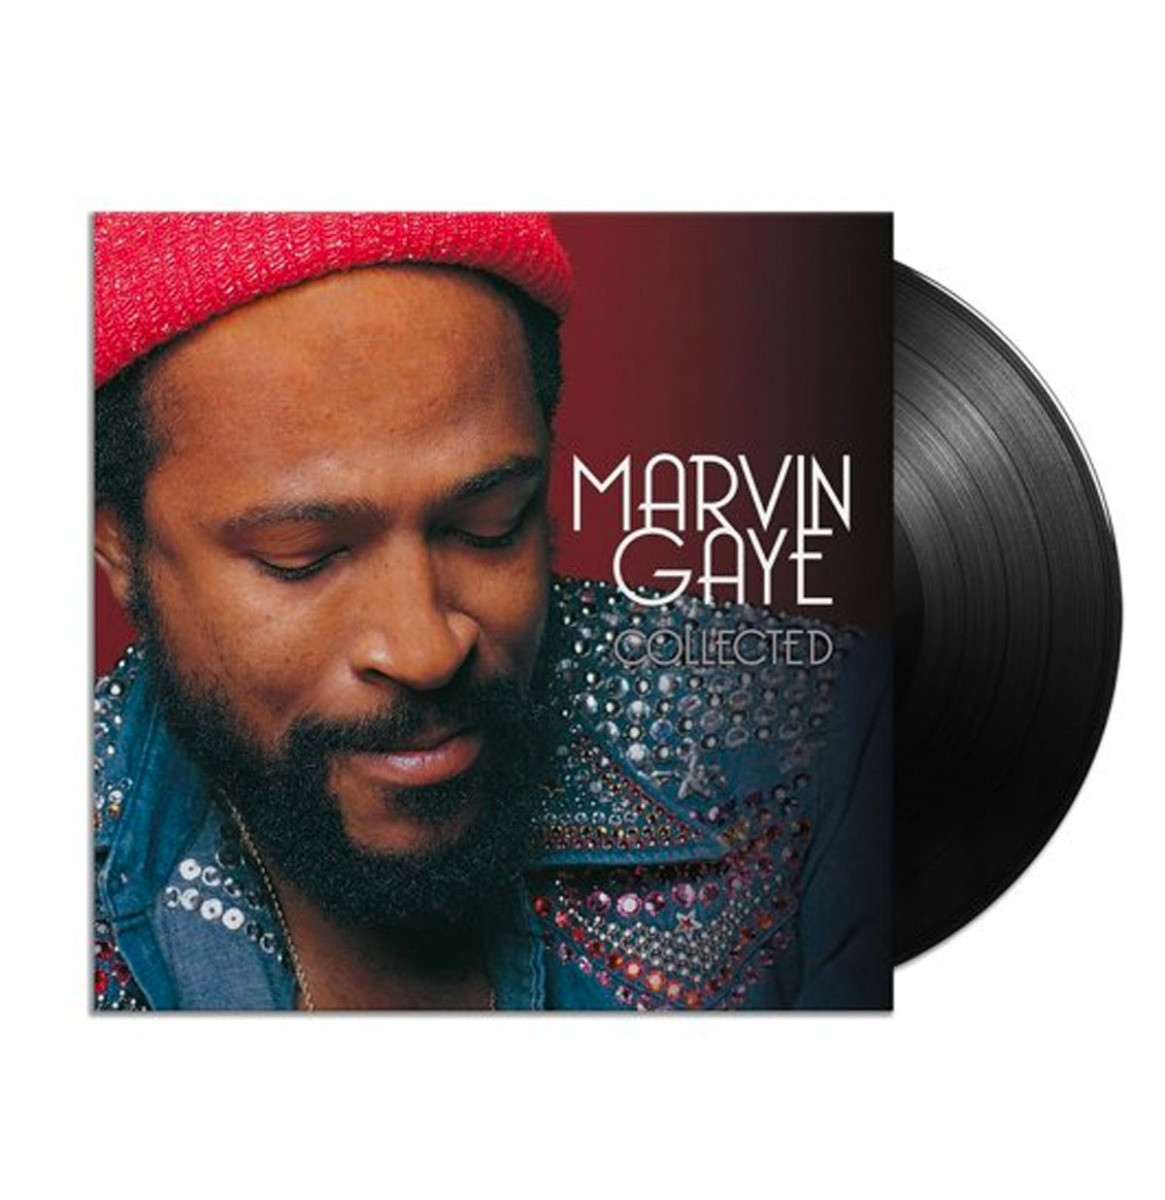 Marvin Gaye - Collected LP